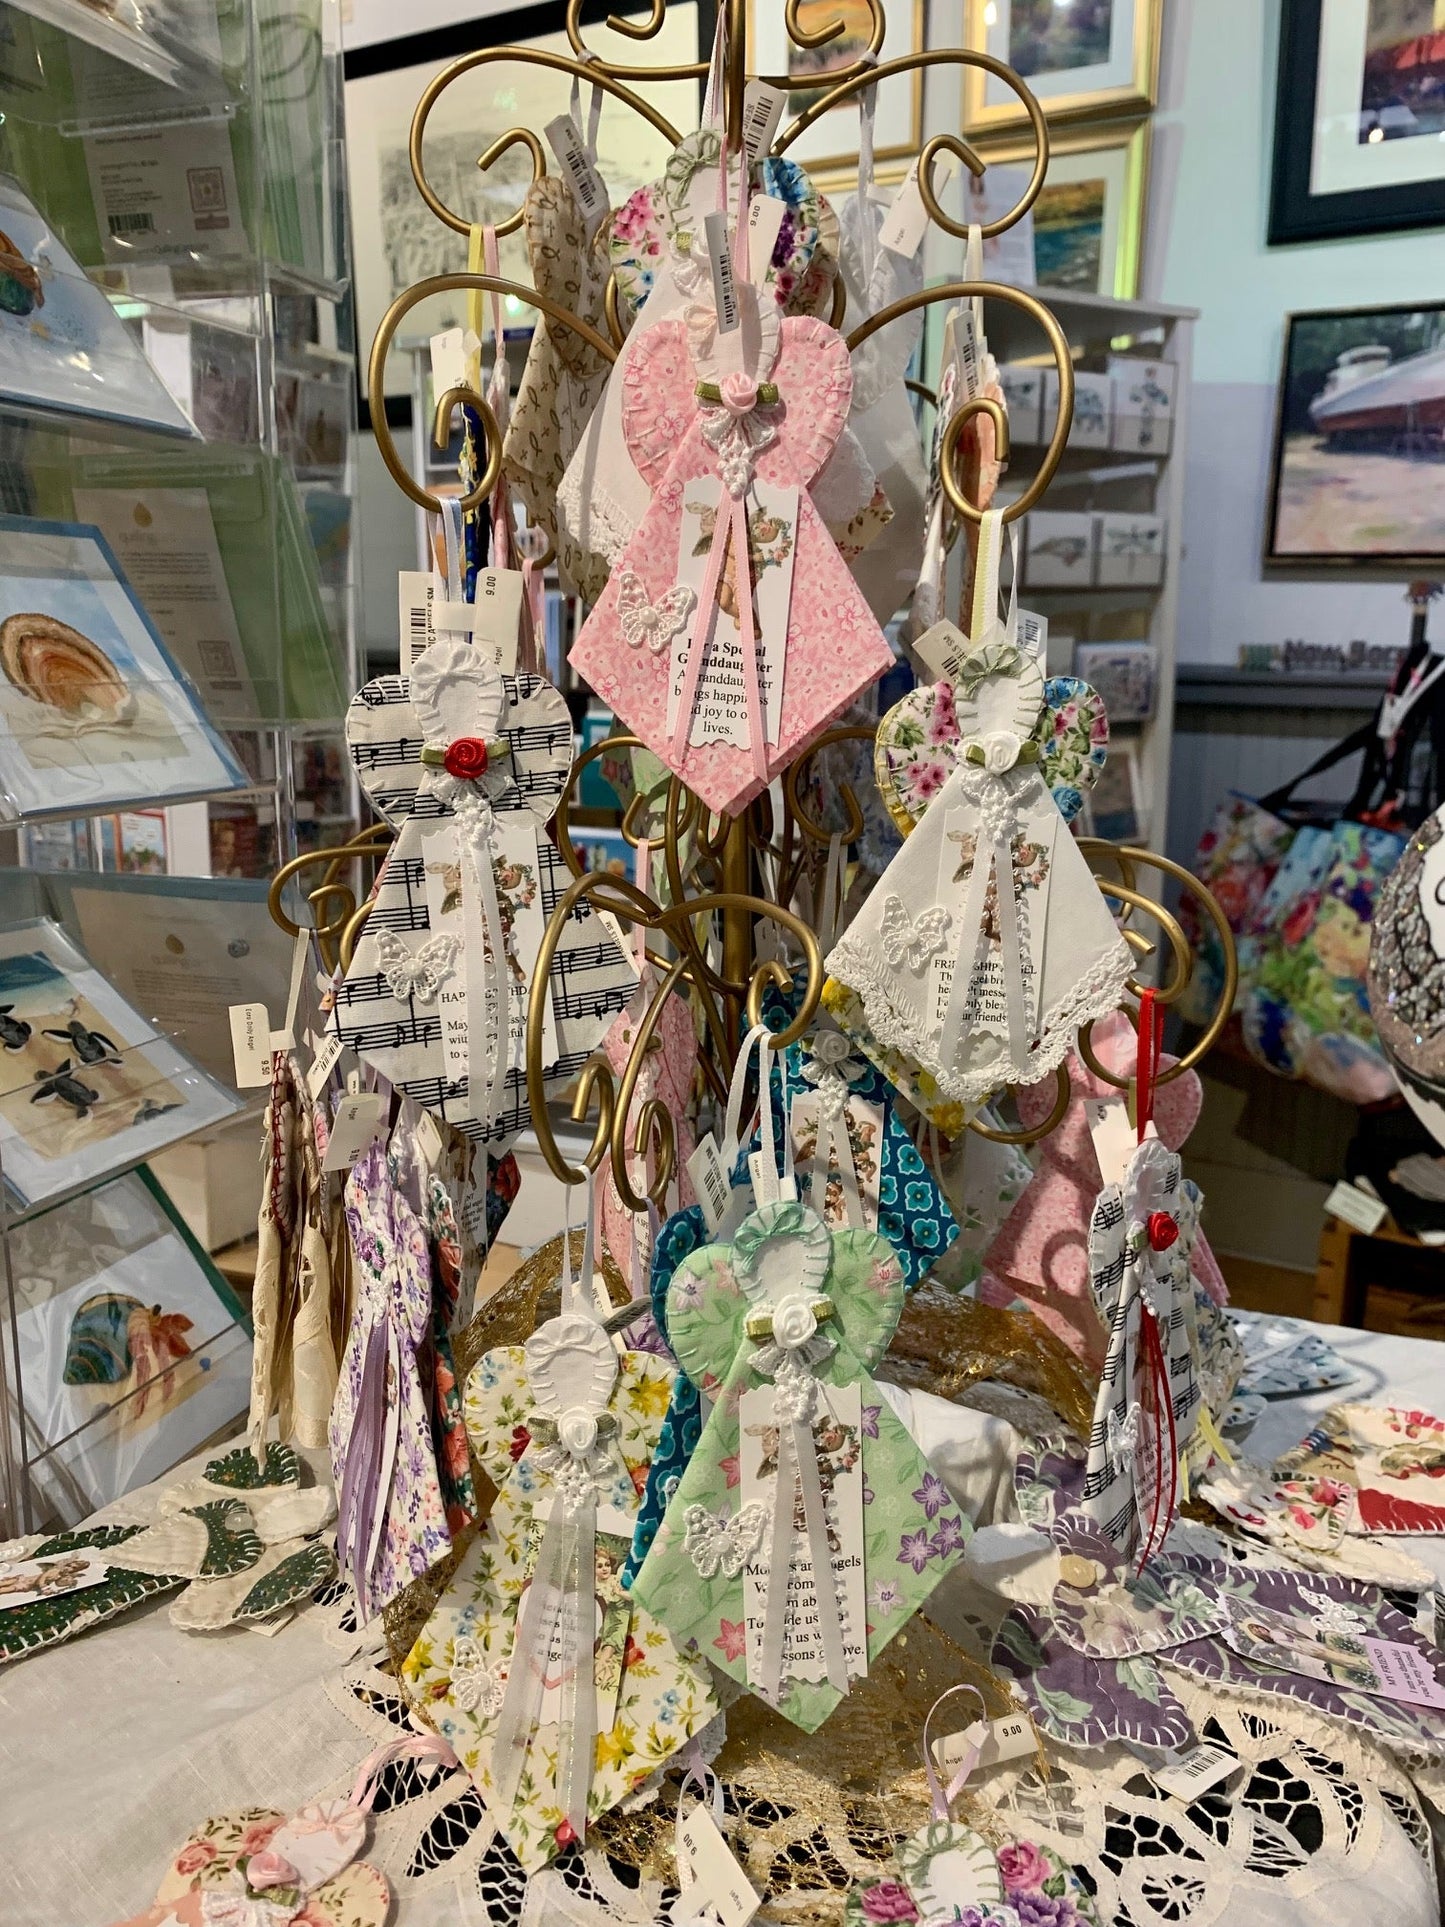 Angels Handmade in New Bern, NC🎨 Gifts🎨 Buy Art at Carolina Creations Gallery in Downtown New Bern🎨